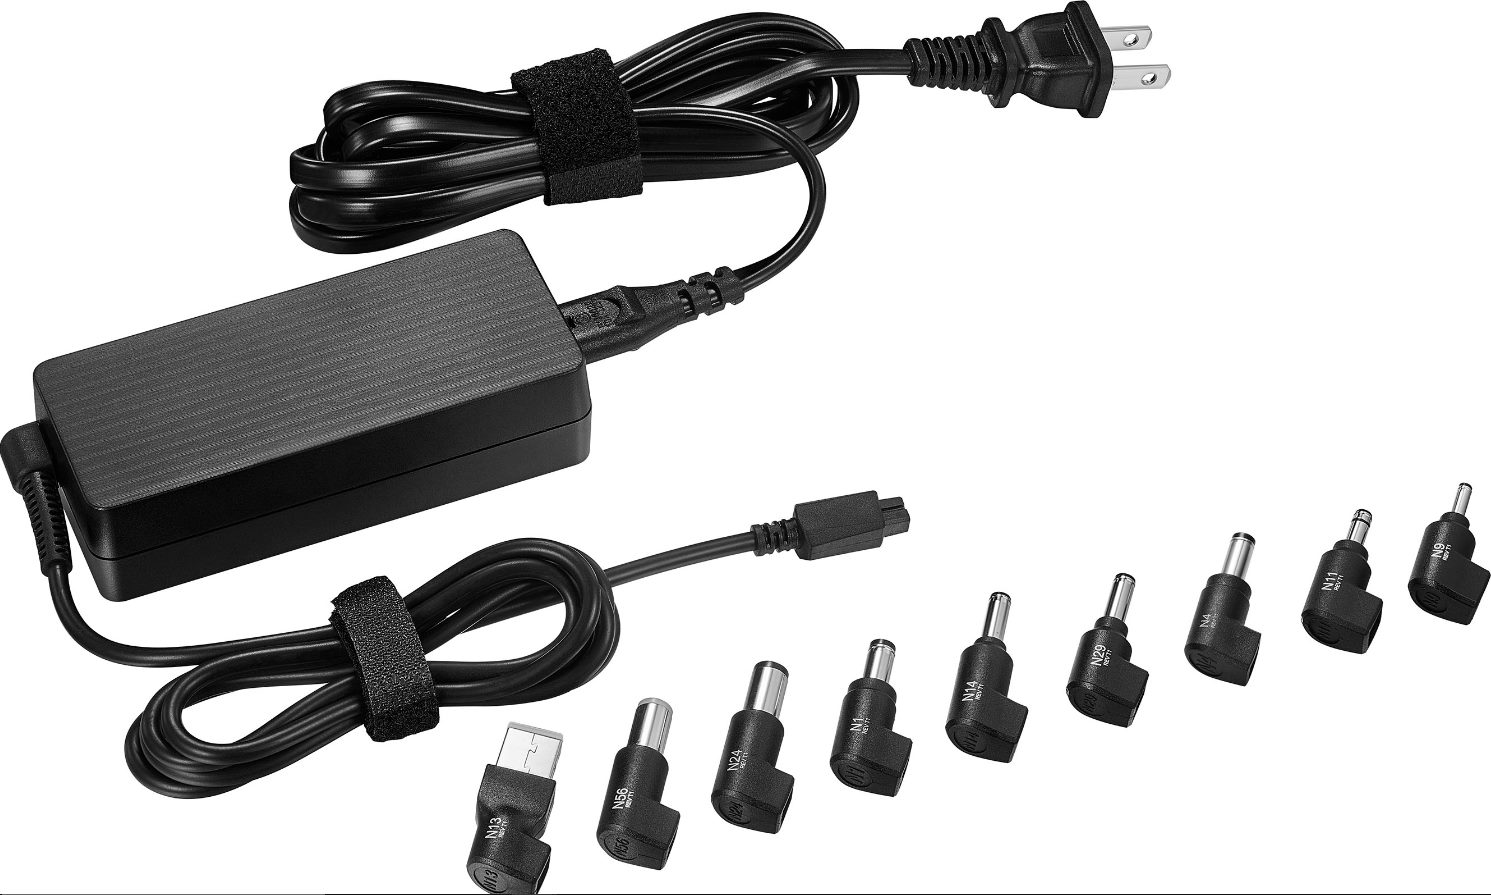 13-best-insignia-ultrabook-charger-for-2023